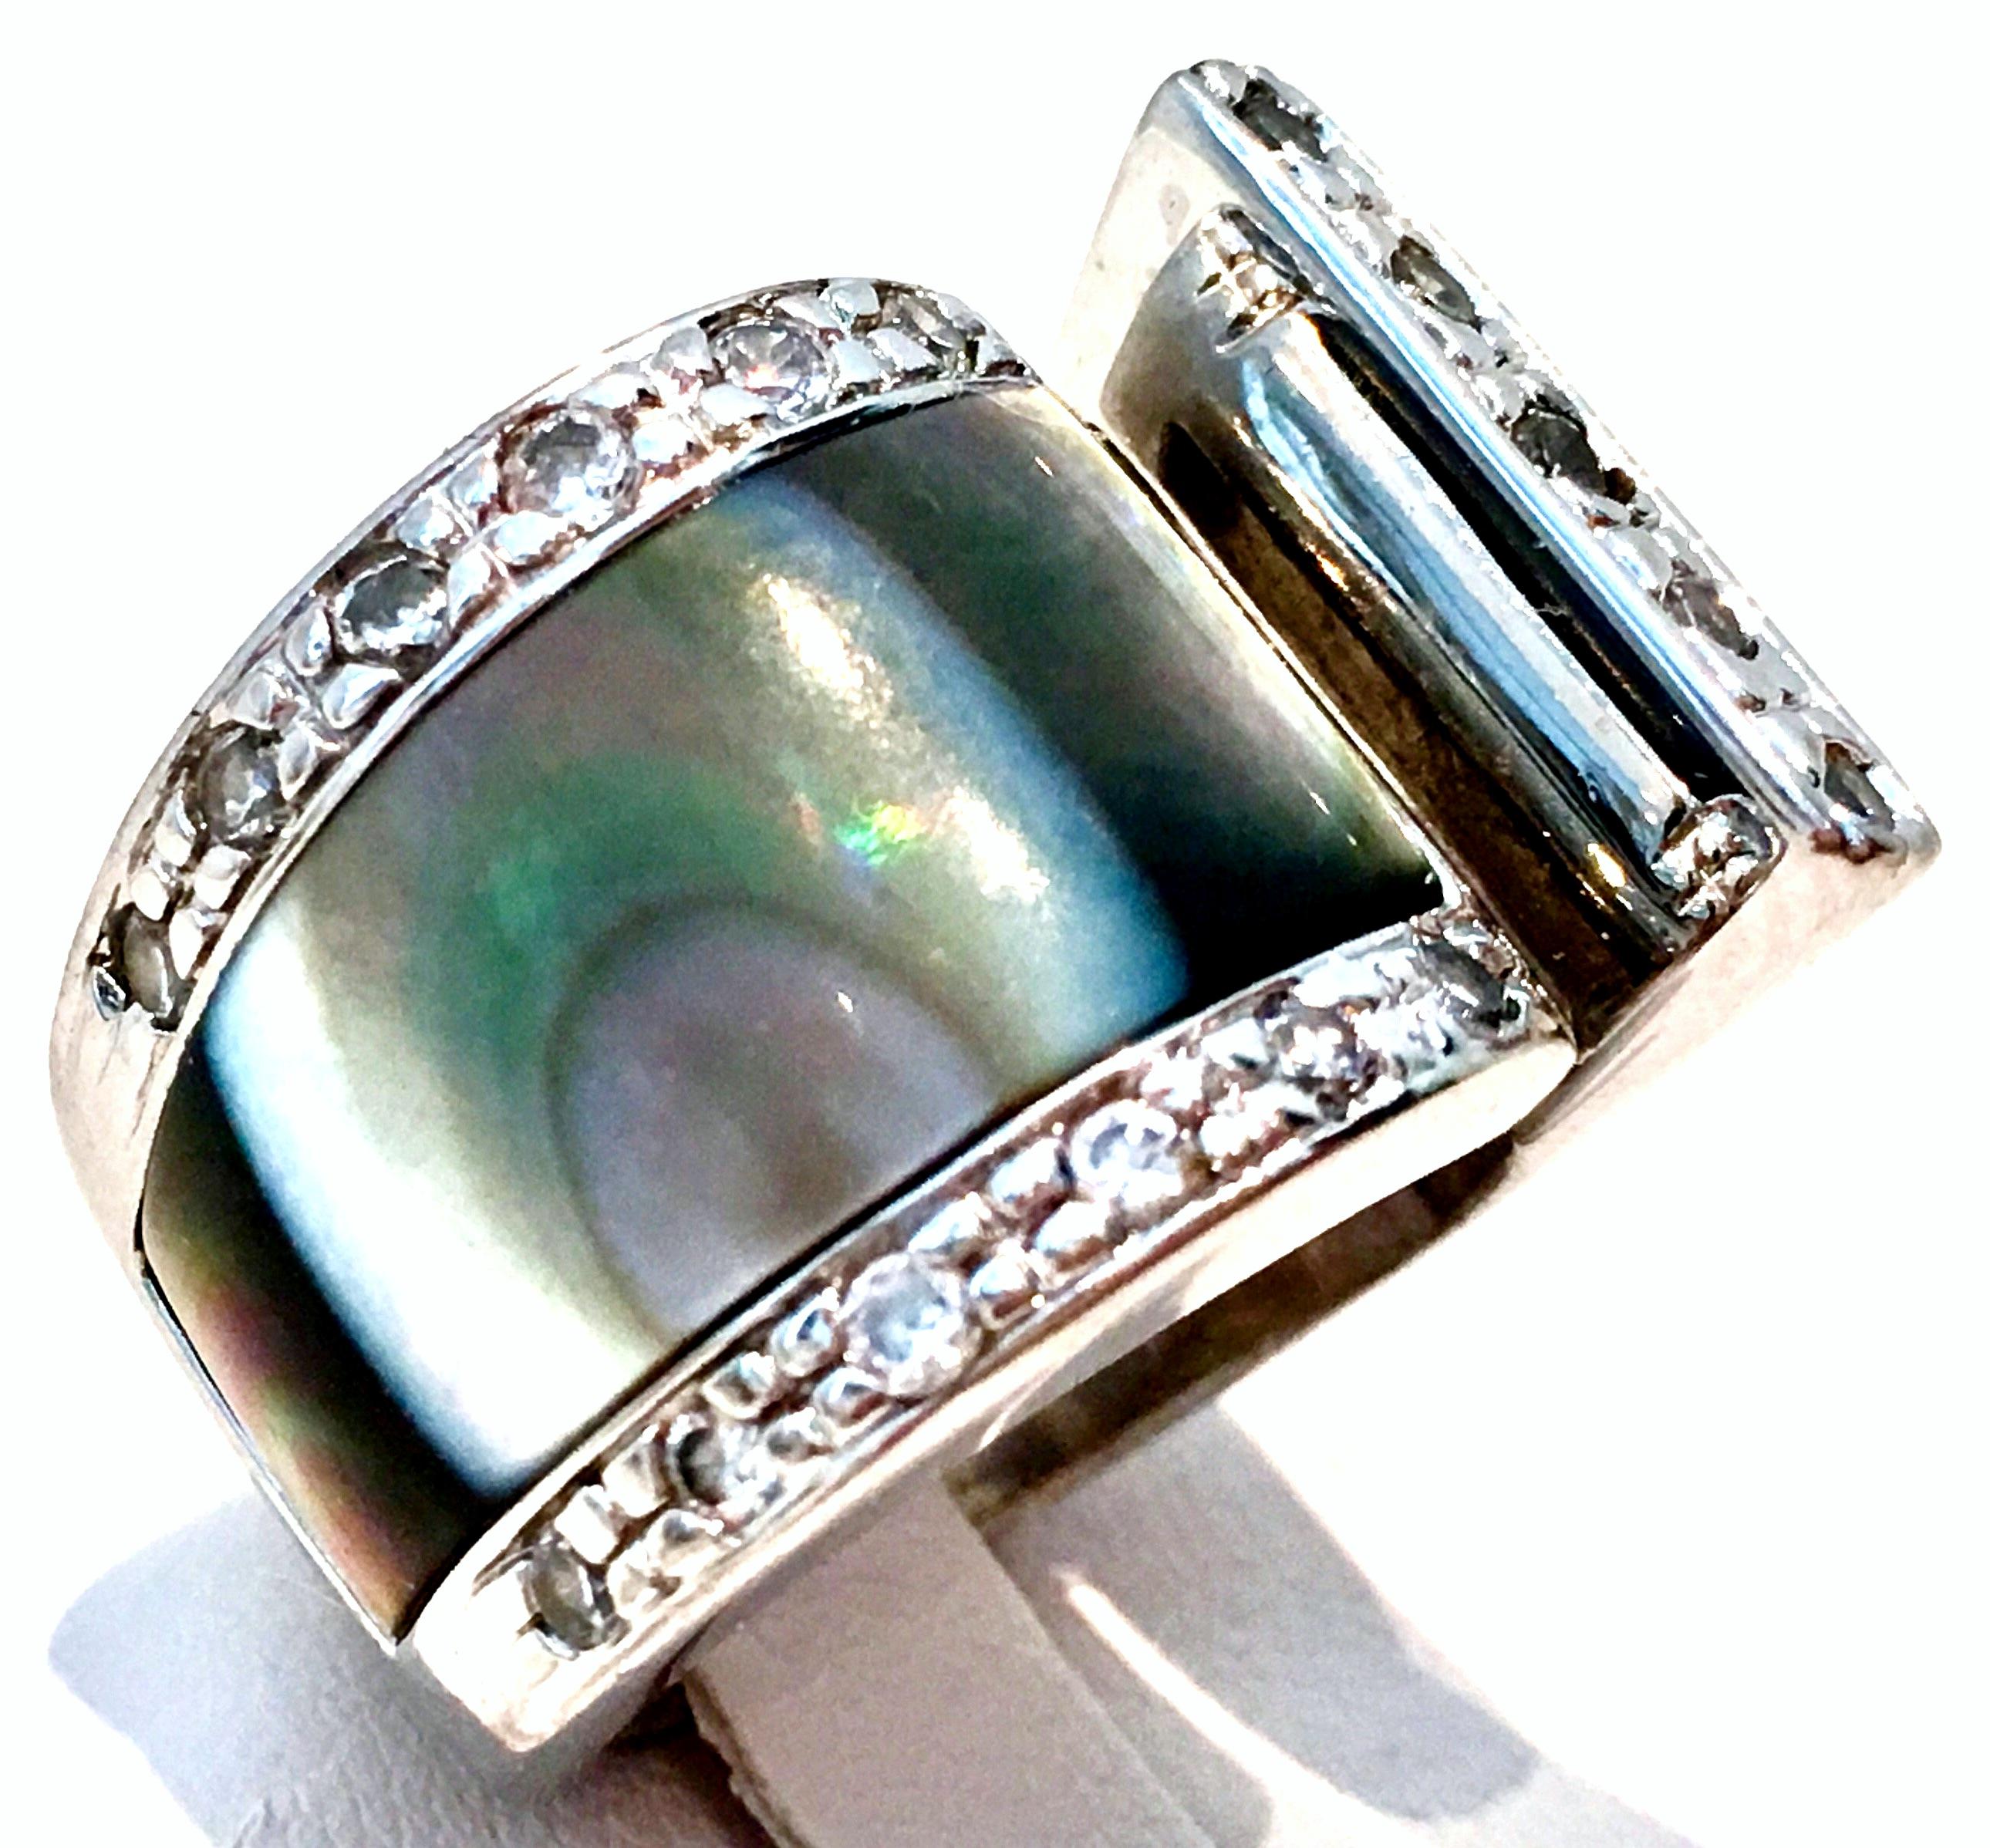 1970'S Sterling Silver, Abalone Shell & Austrian Crystal Rhinestone Modern Wrap Ring, Signed 925. Size 5. Made In Mexico